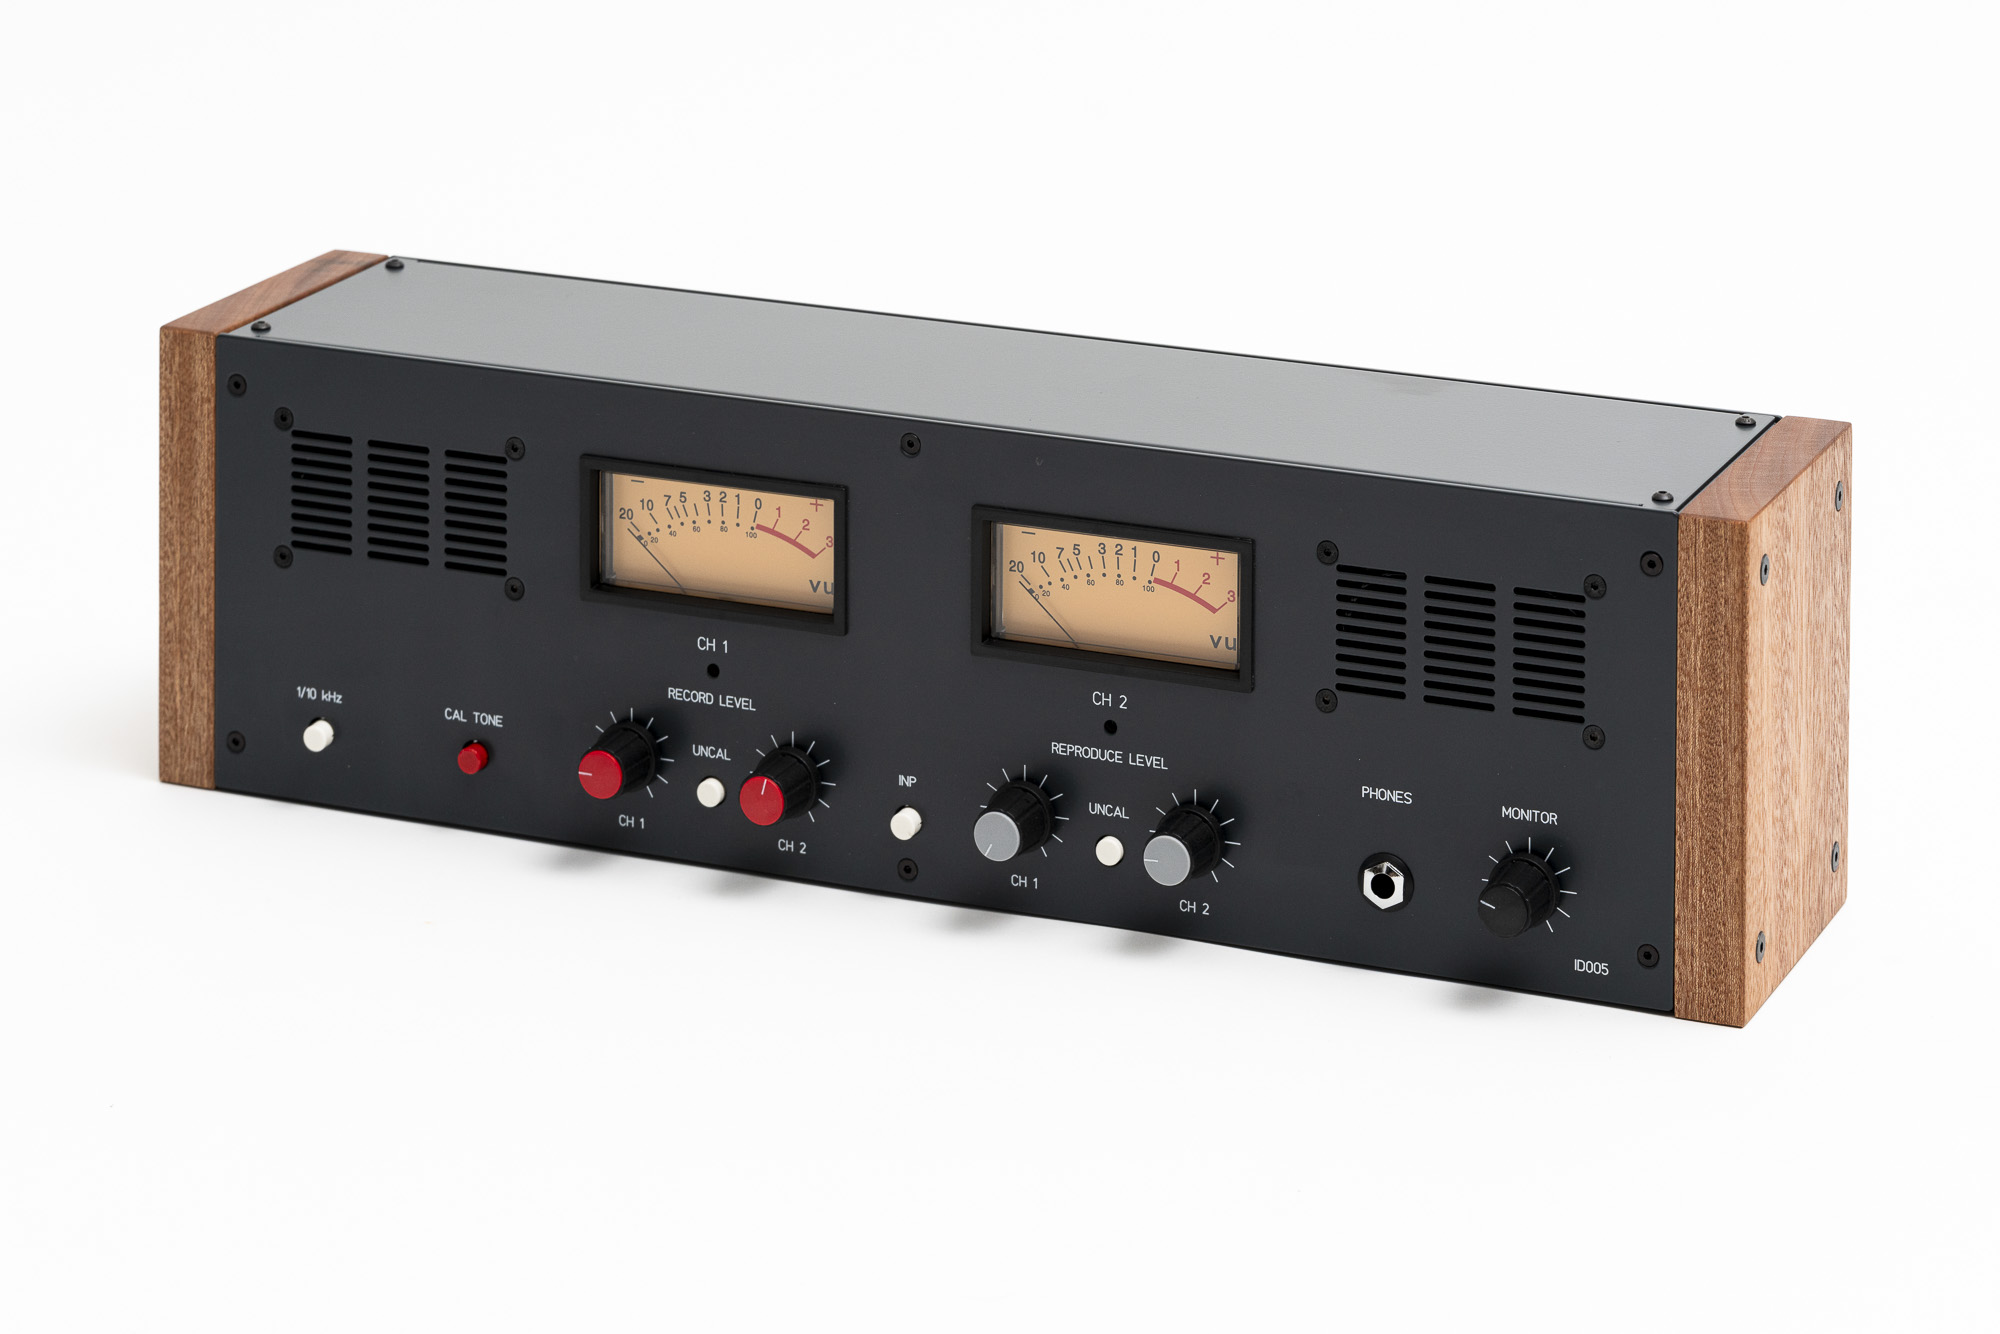 NEW VU Meter Bridge Unit for Studer A807, A810, A67, B67, C37 or any Other Reel To Reel Tape Recorder